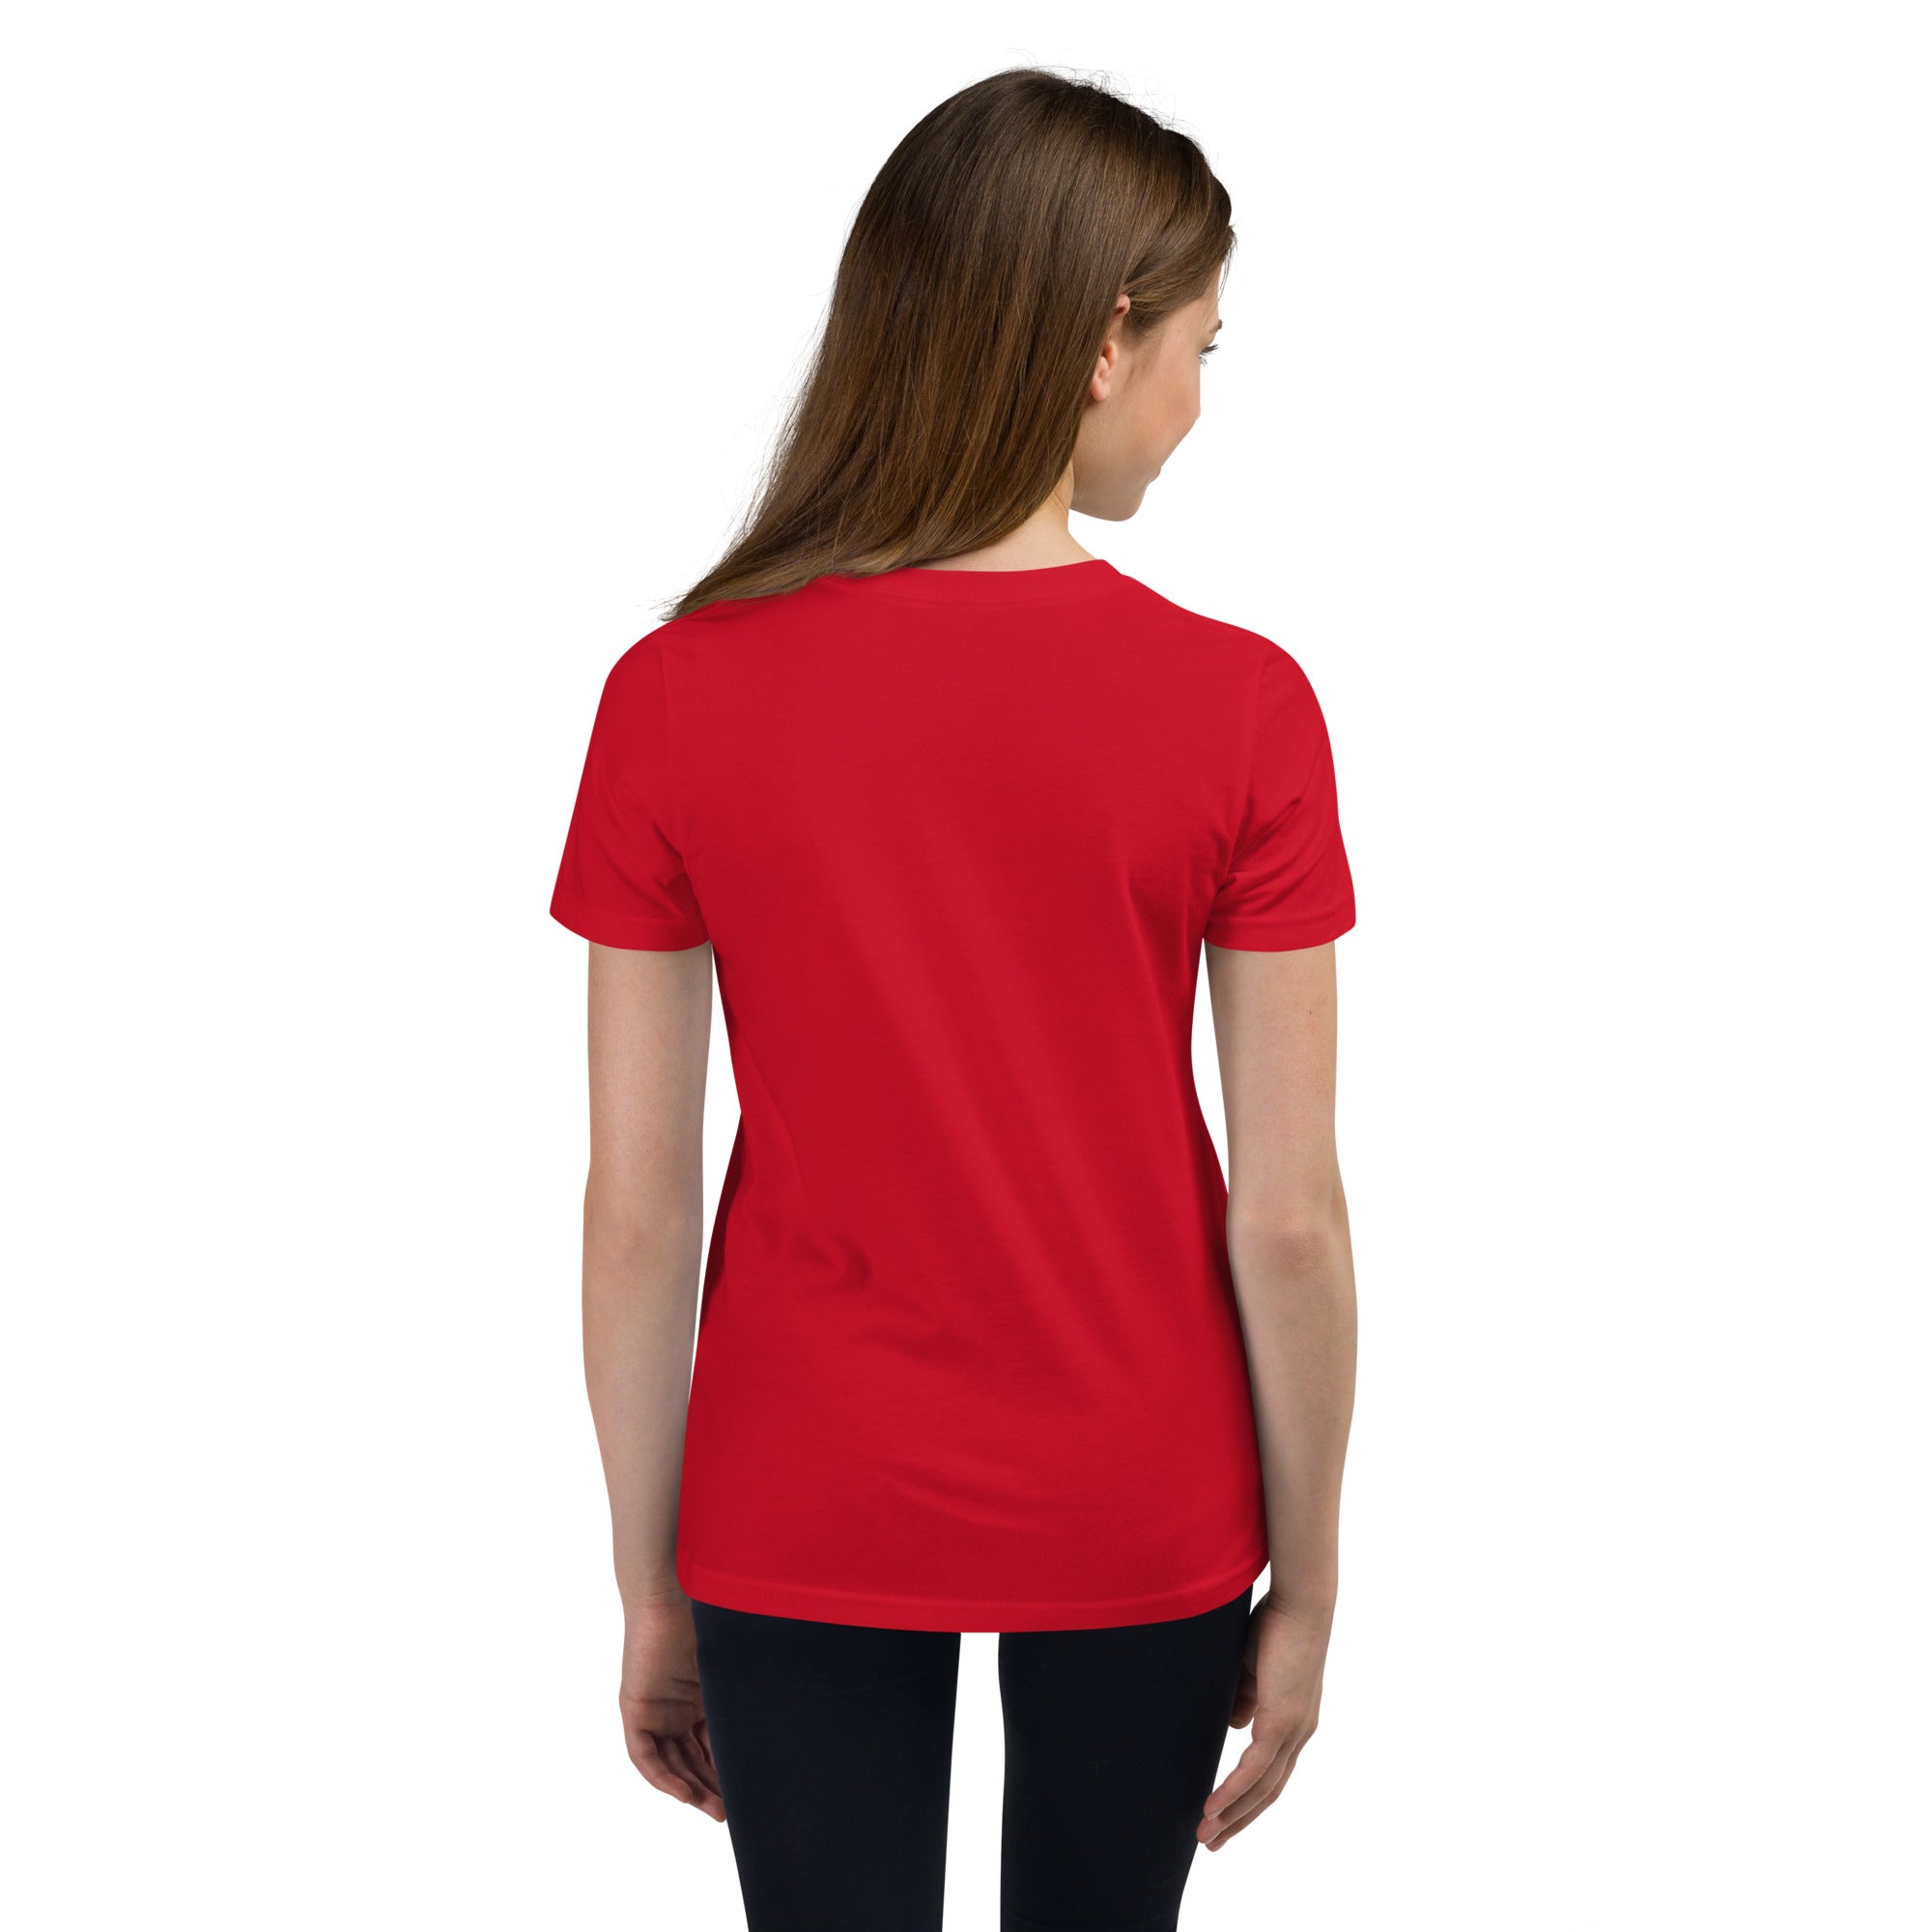 San Marcos Logo W - Red Youth Short Sleeve T-Shirt